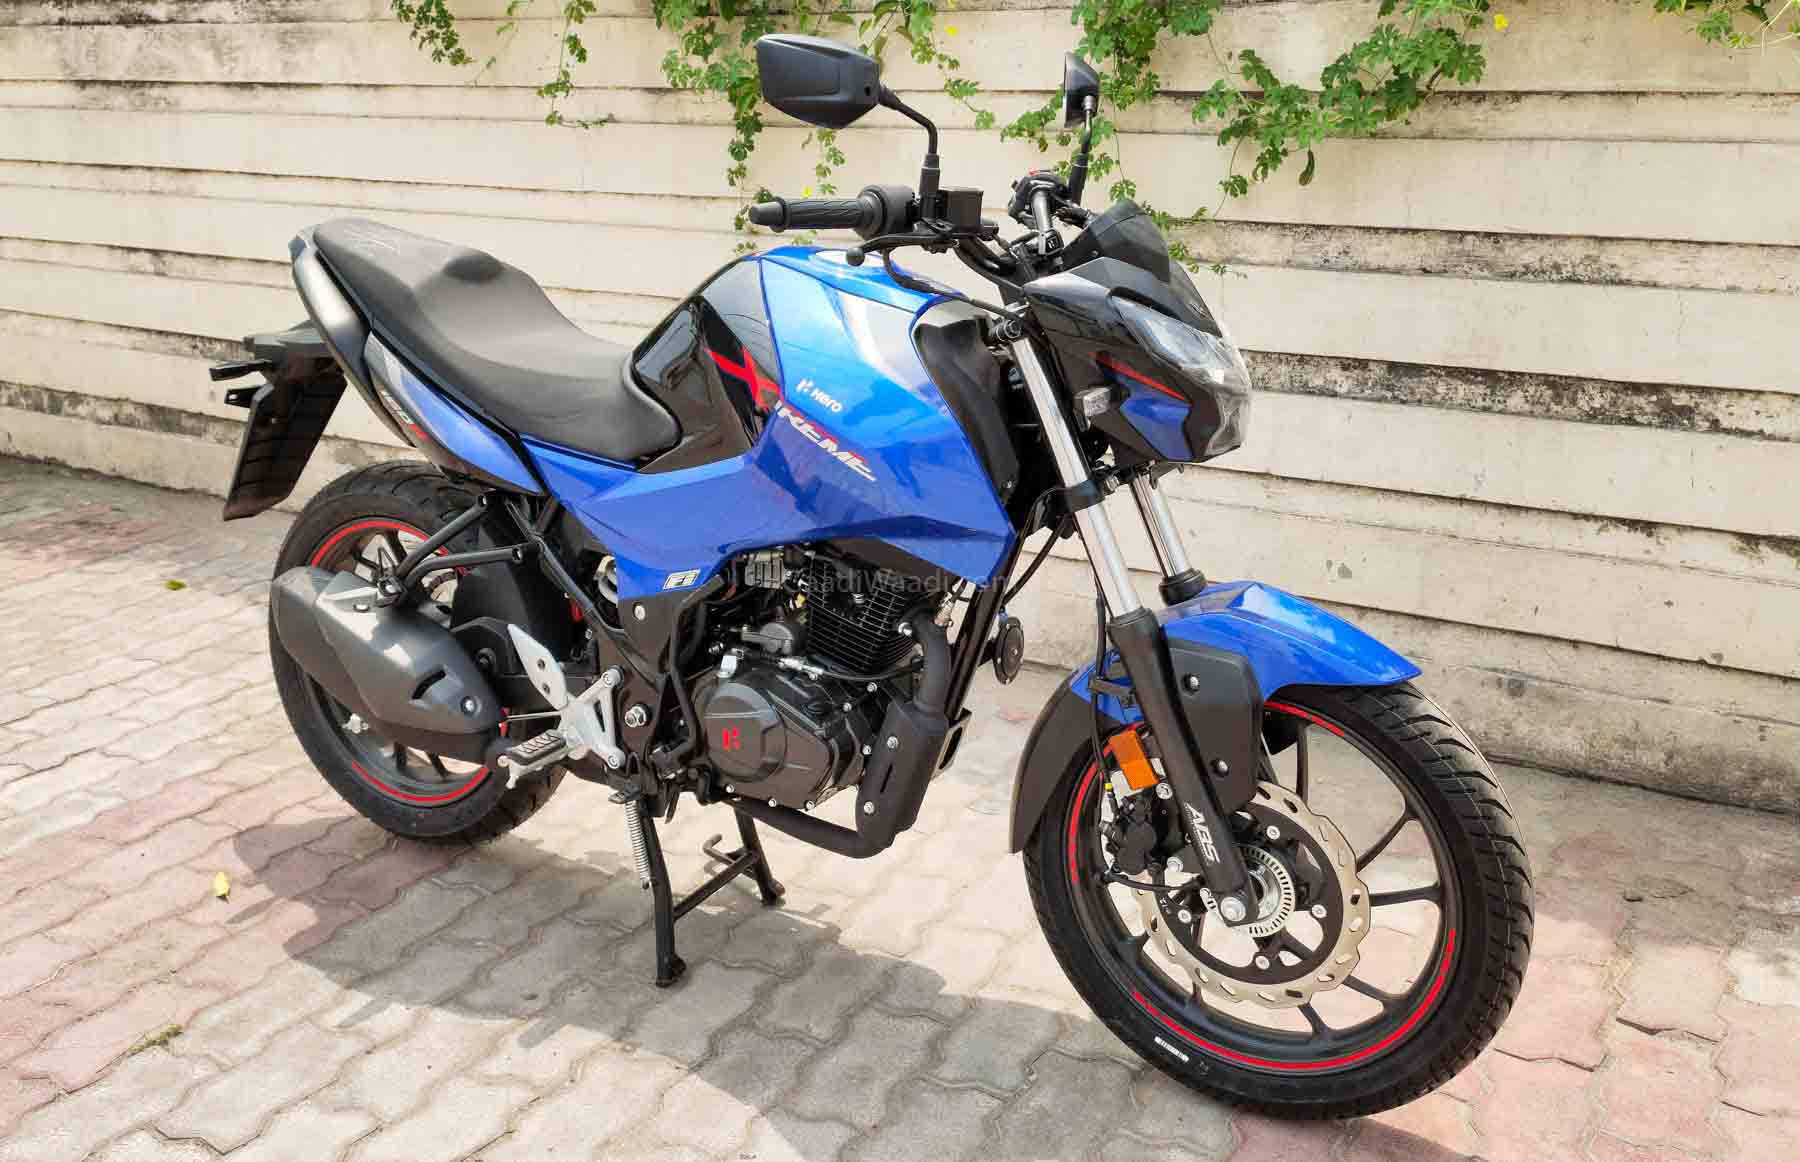 Over 12 000 Units Of Hero Xtreme 160r Sold In October